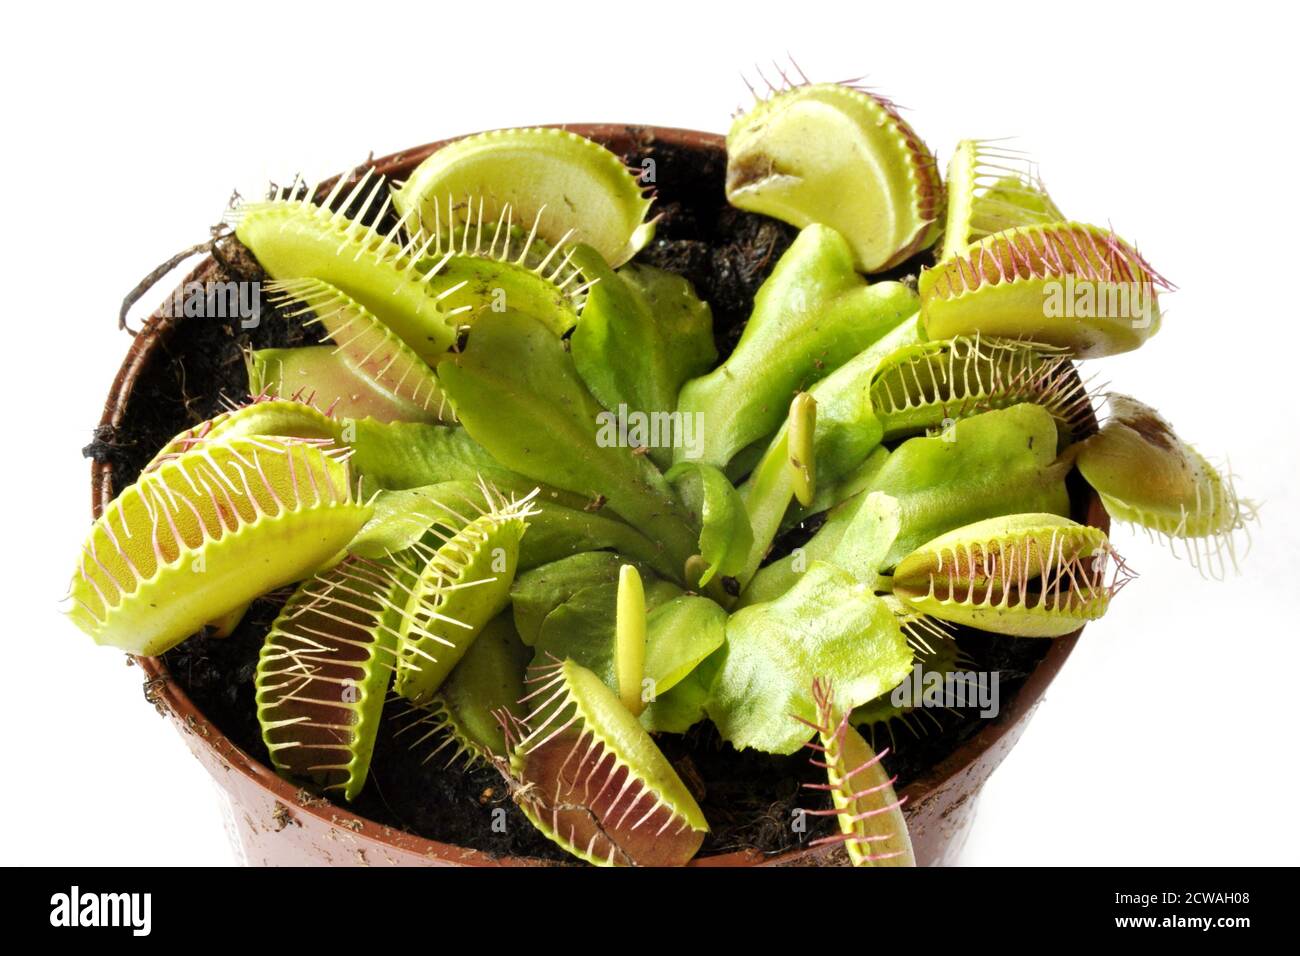 Closeup on the insect trapping structures of a Venus Flytrap plant in a flower pot Stock Photo